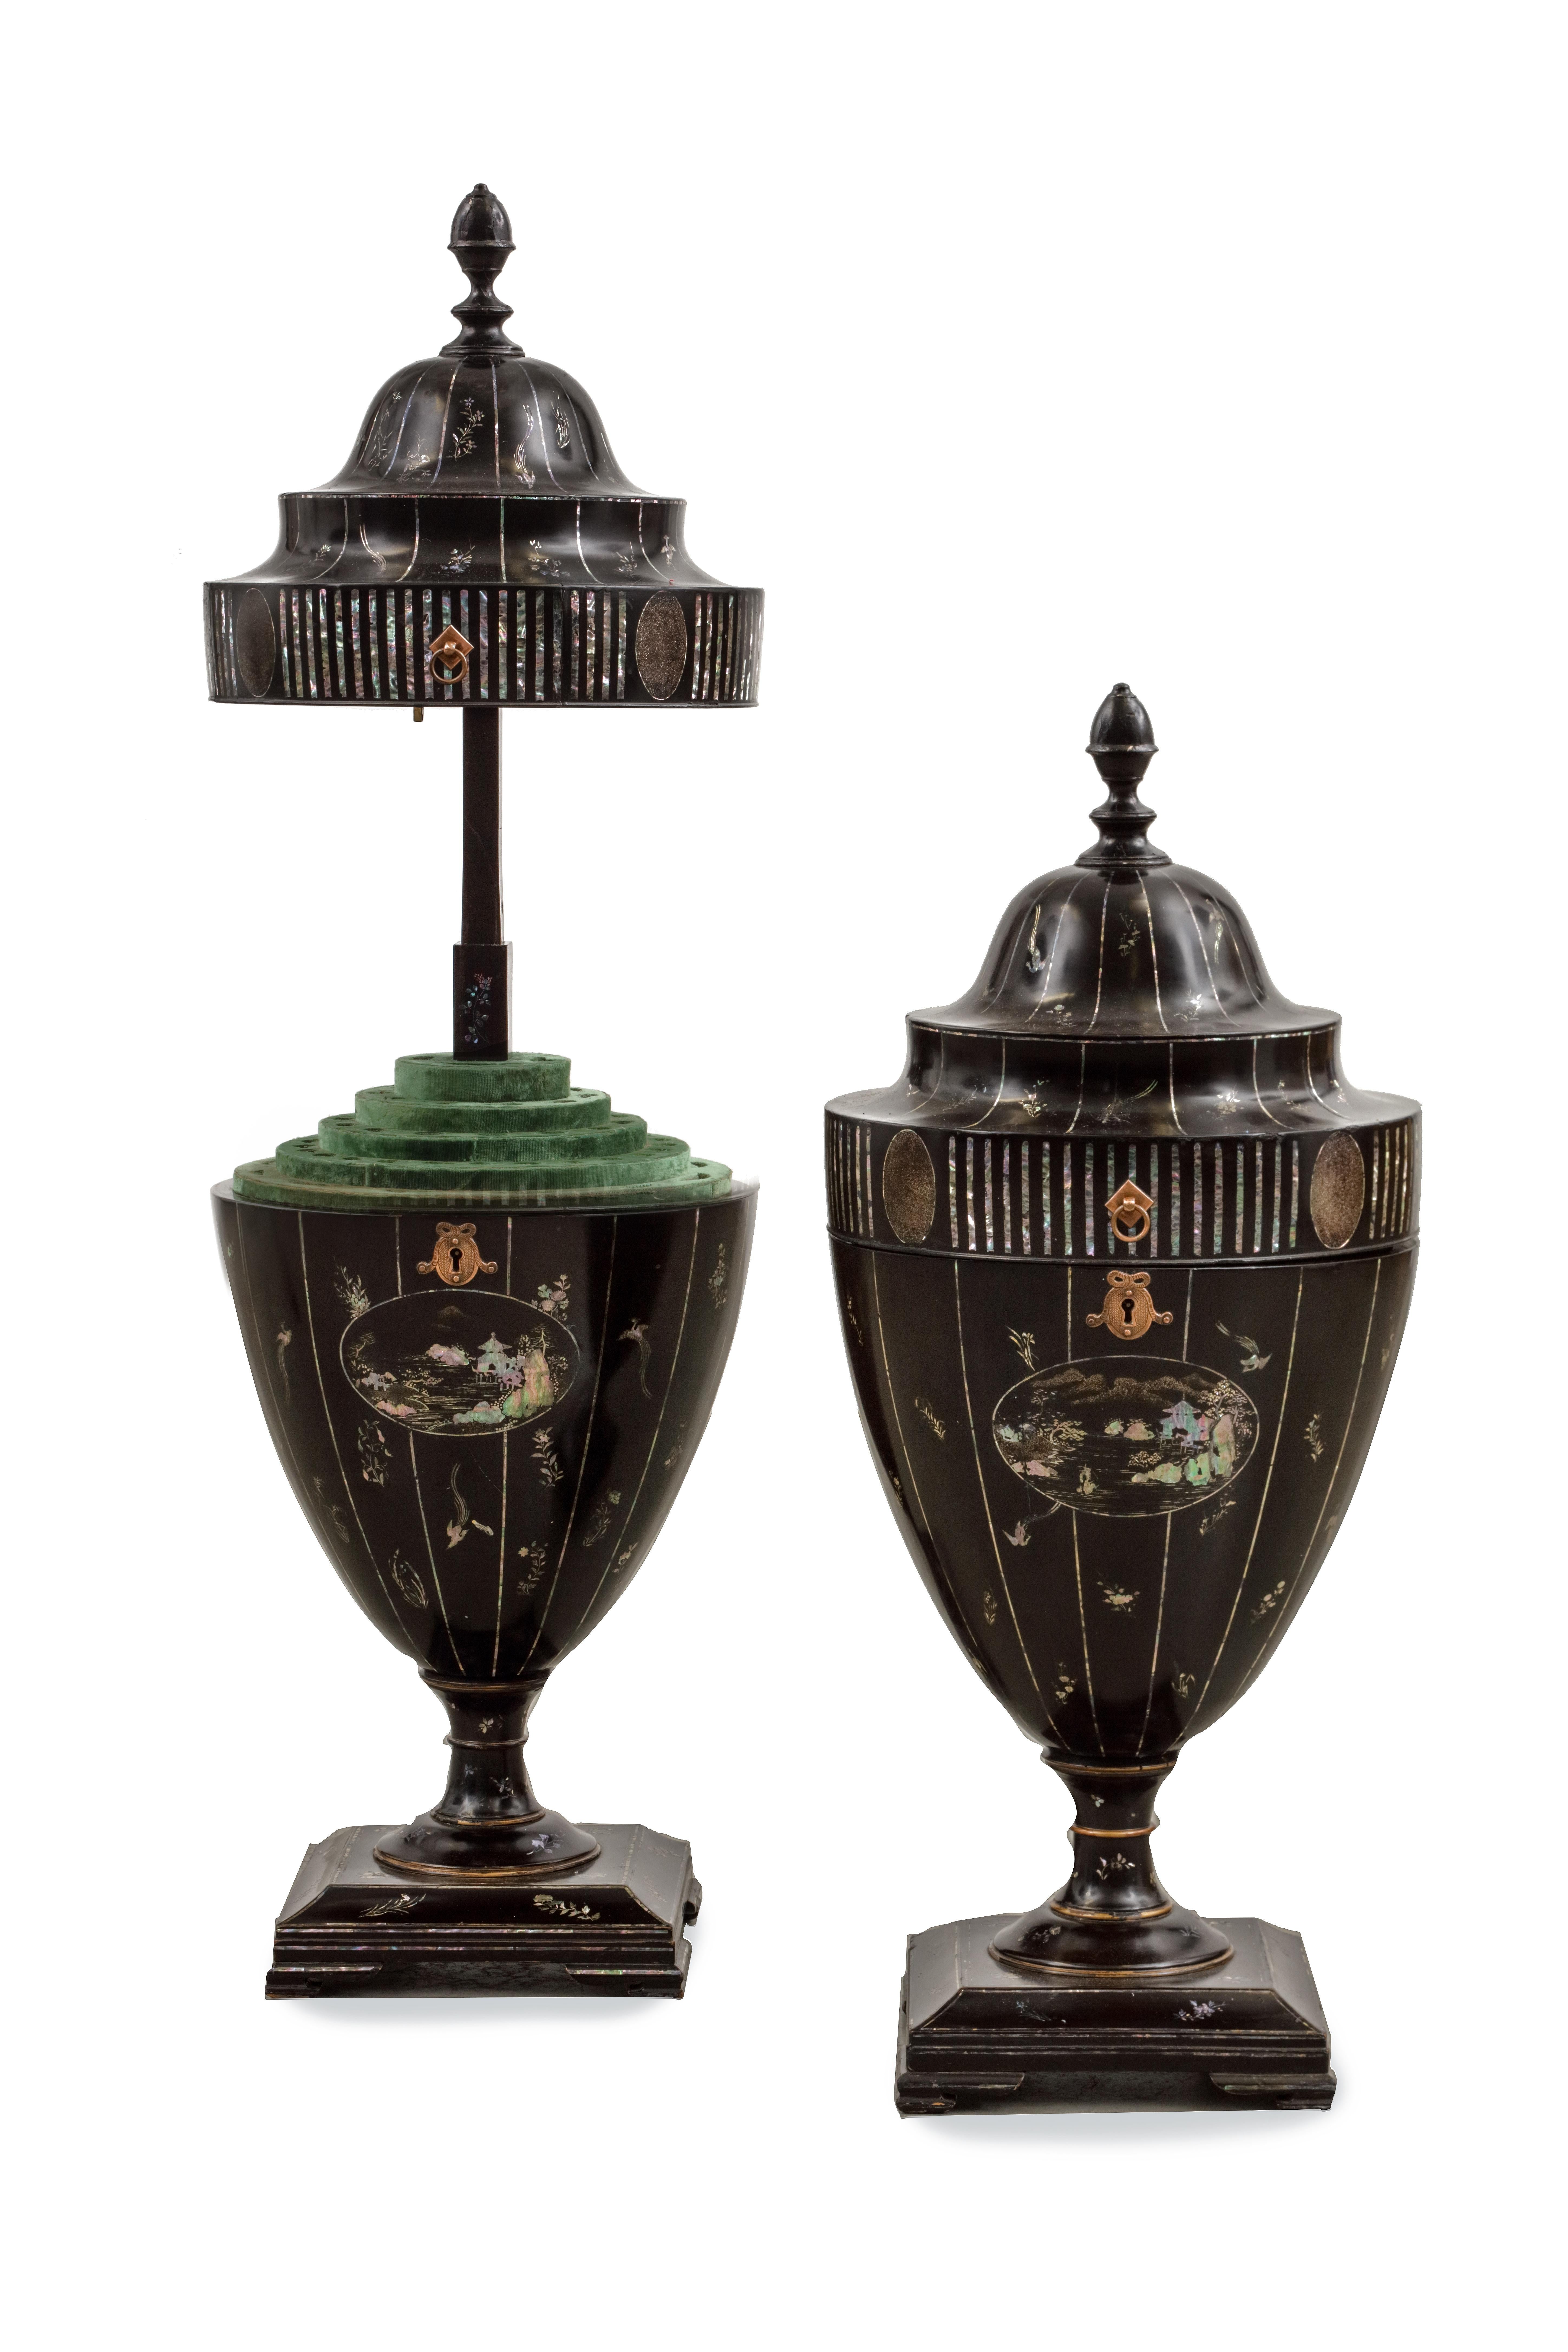 A rare pair of Kyoto-Nagasaki style lacquer and mother-of-pearl inlaid knife urns
Edo period, early 19th century

Measures: Height 71 x diameter 30 cm

?Formed as urns with vertically lifting covers and elongated finials, revealing fitted green